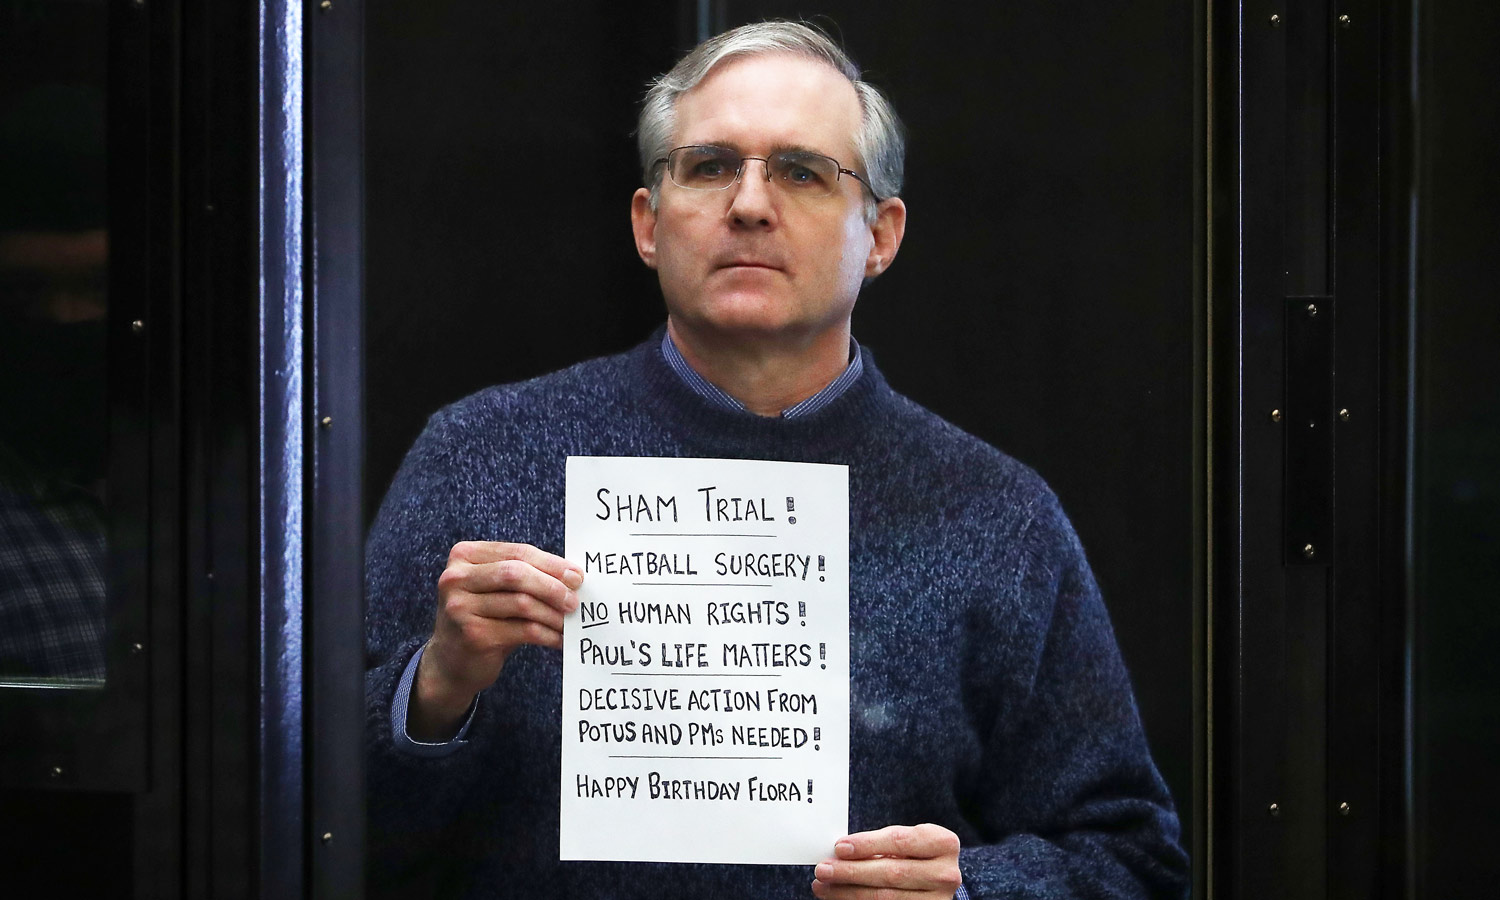 Paul Whelan holds up a sign at the end of his trial - "Sham trial! Meatball surgery! No human rights! Paul's life matters! Decisive action from potus and PMs needed! Happy Birthday Flora!"